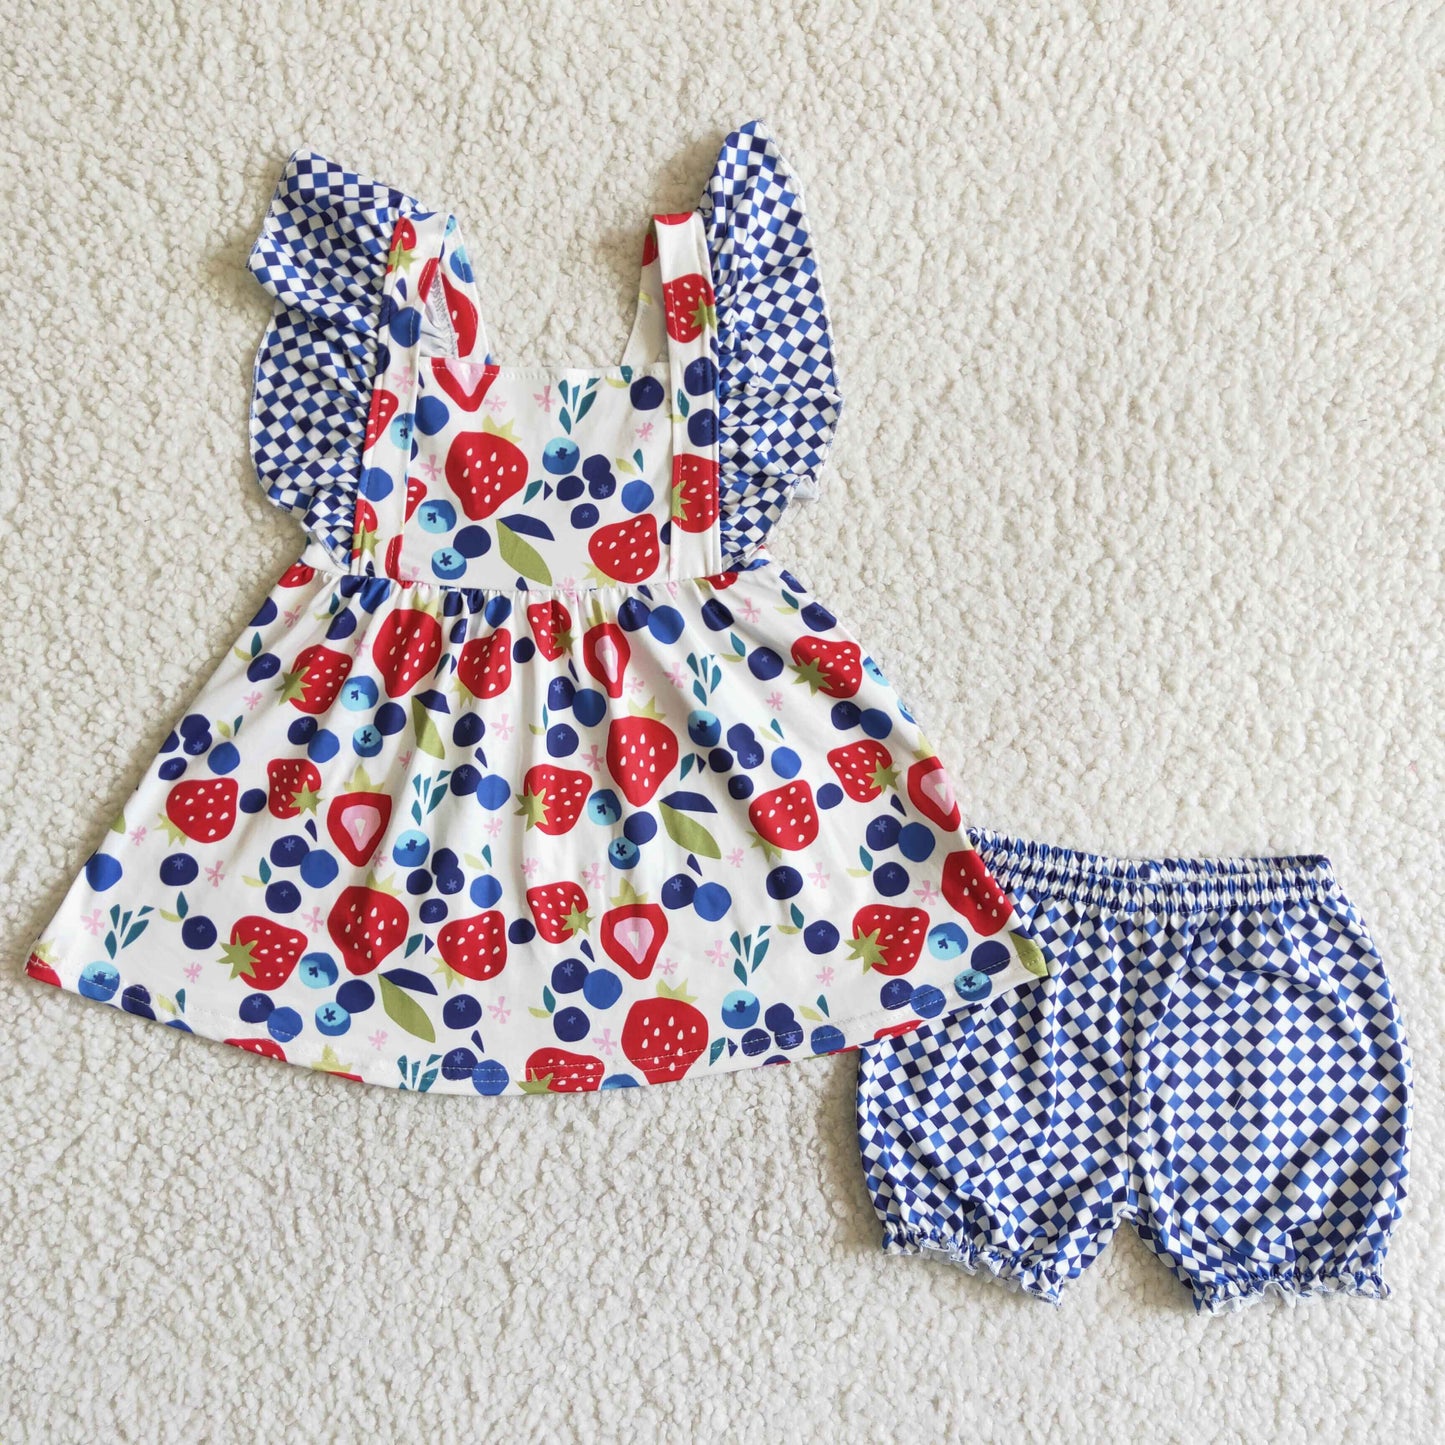 Baby girls strawberry design 2pcs summer short outfit C3-27